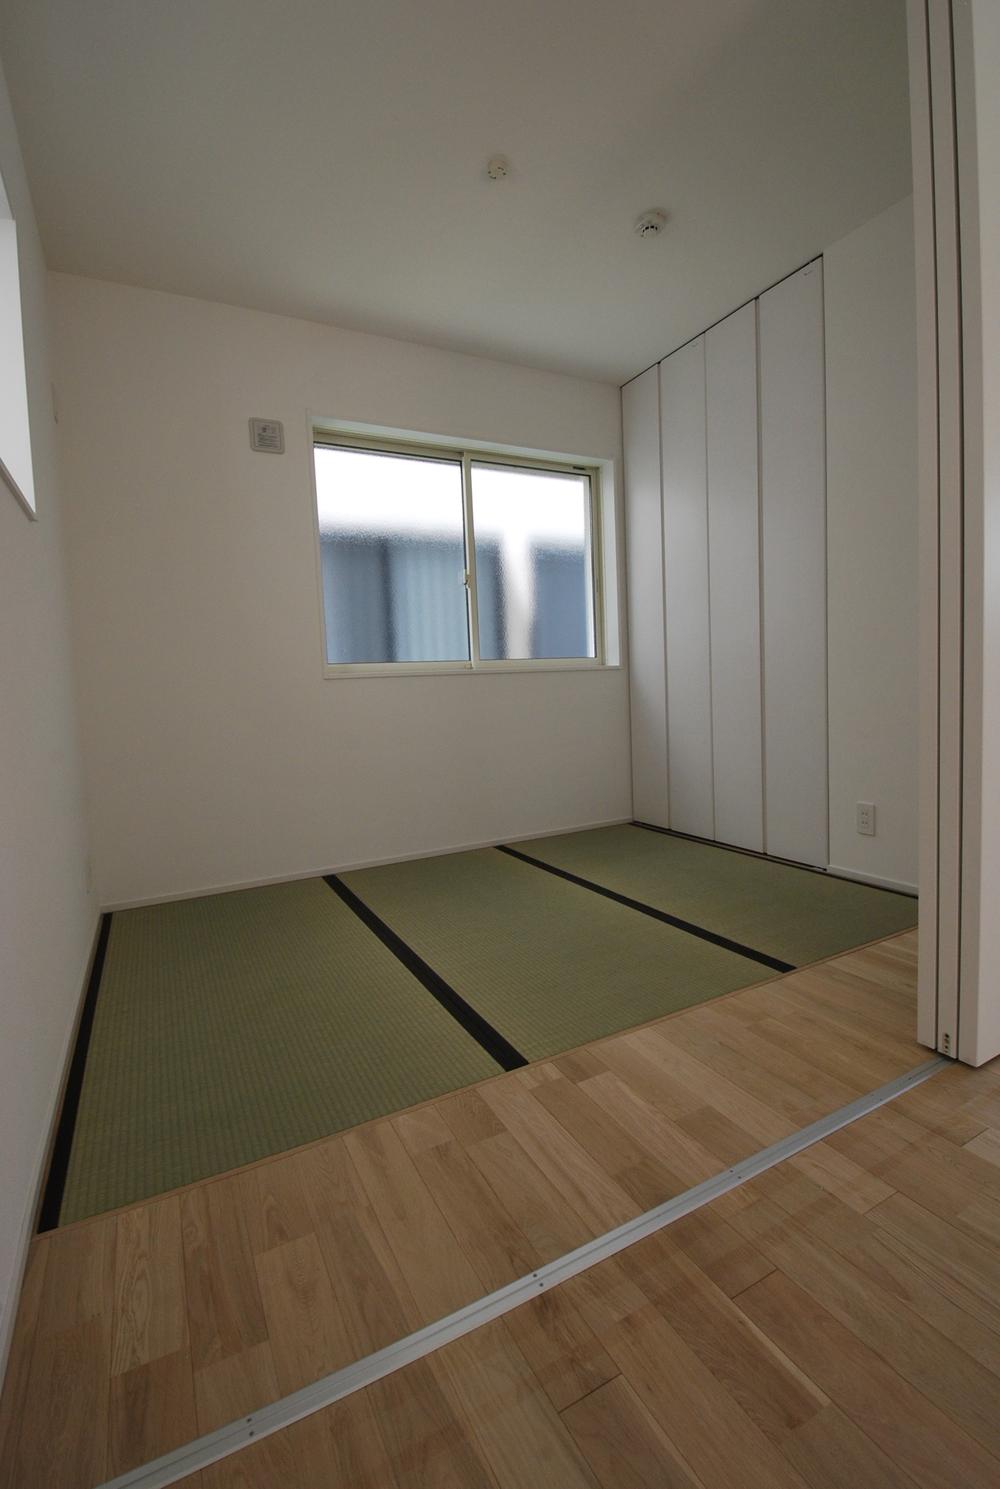 Non-living room. Also equipped with tatami space